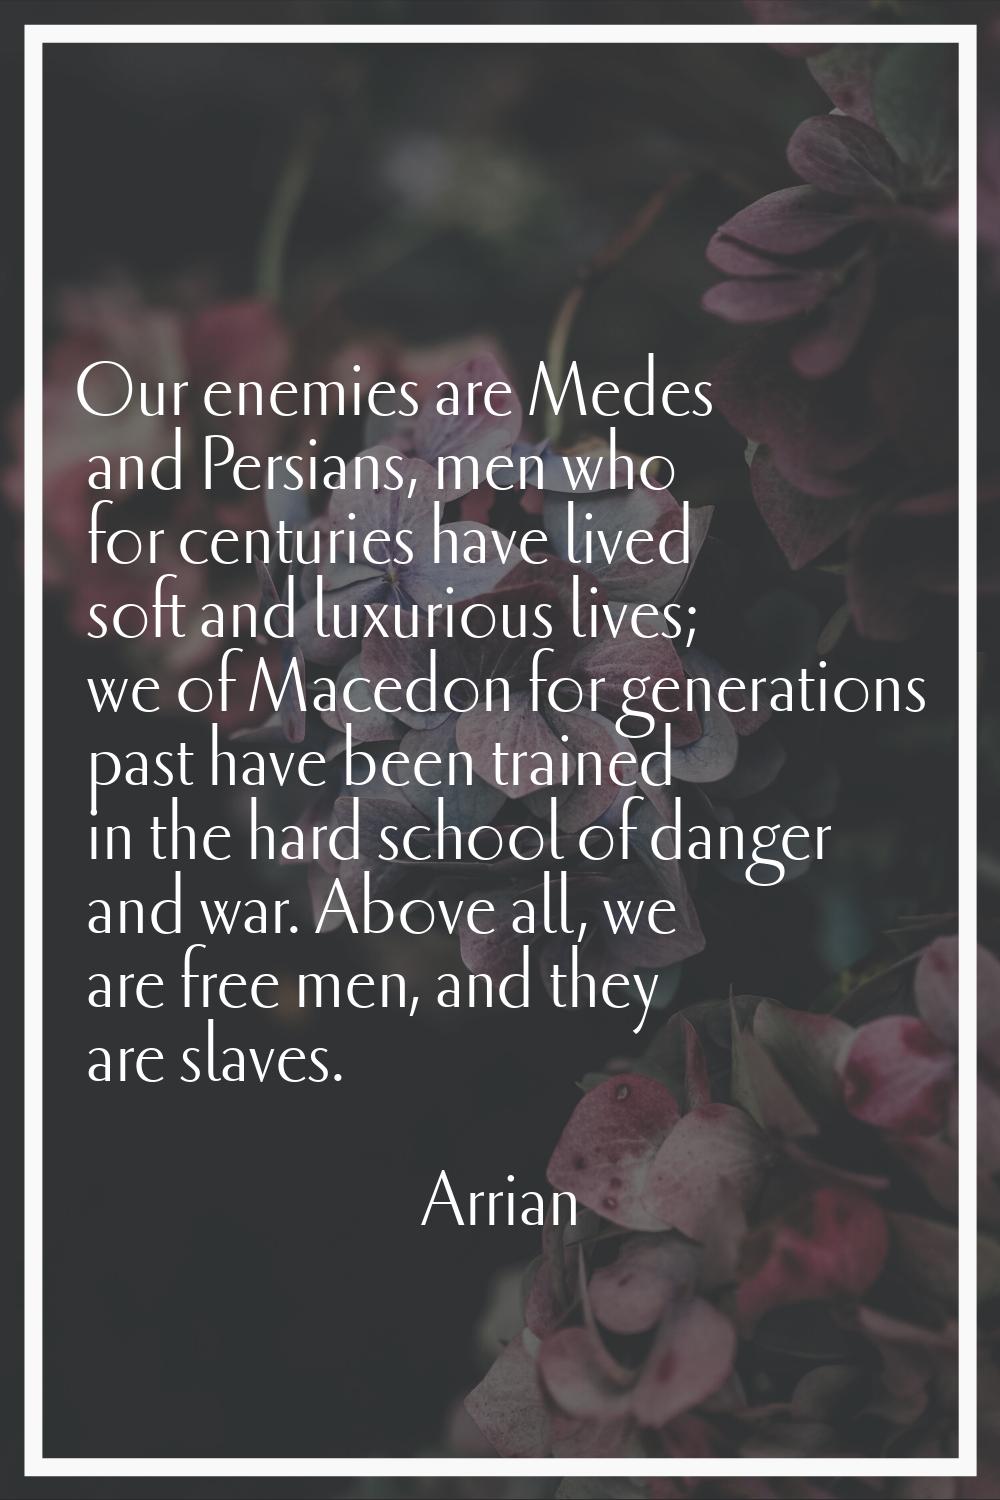 Our enemies are Medes and Persians, men who for centuries have lived soft and luxurious lives; we o